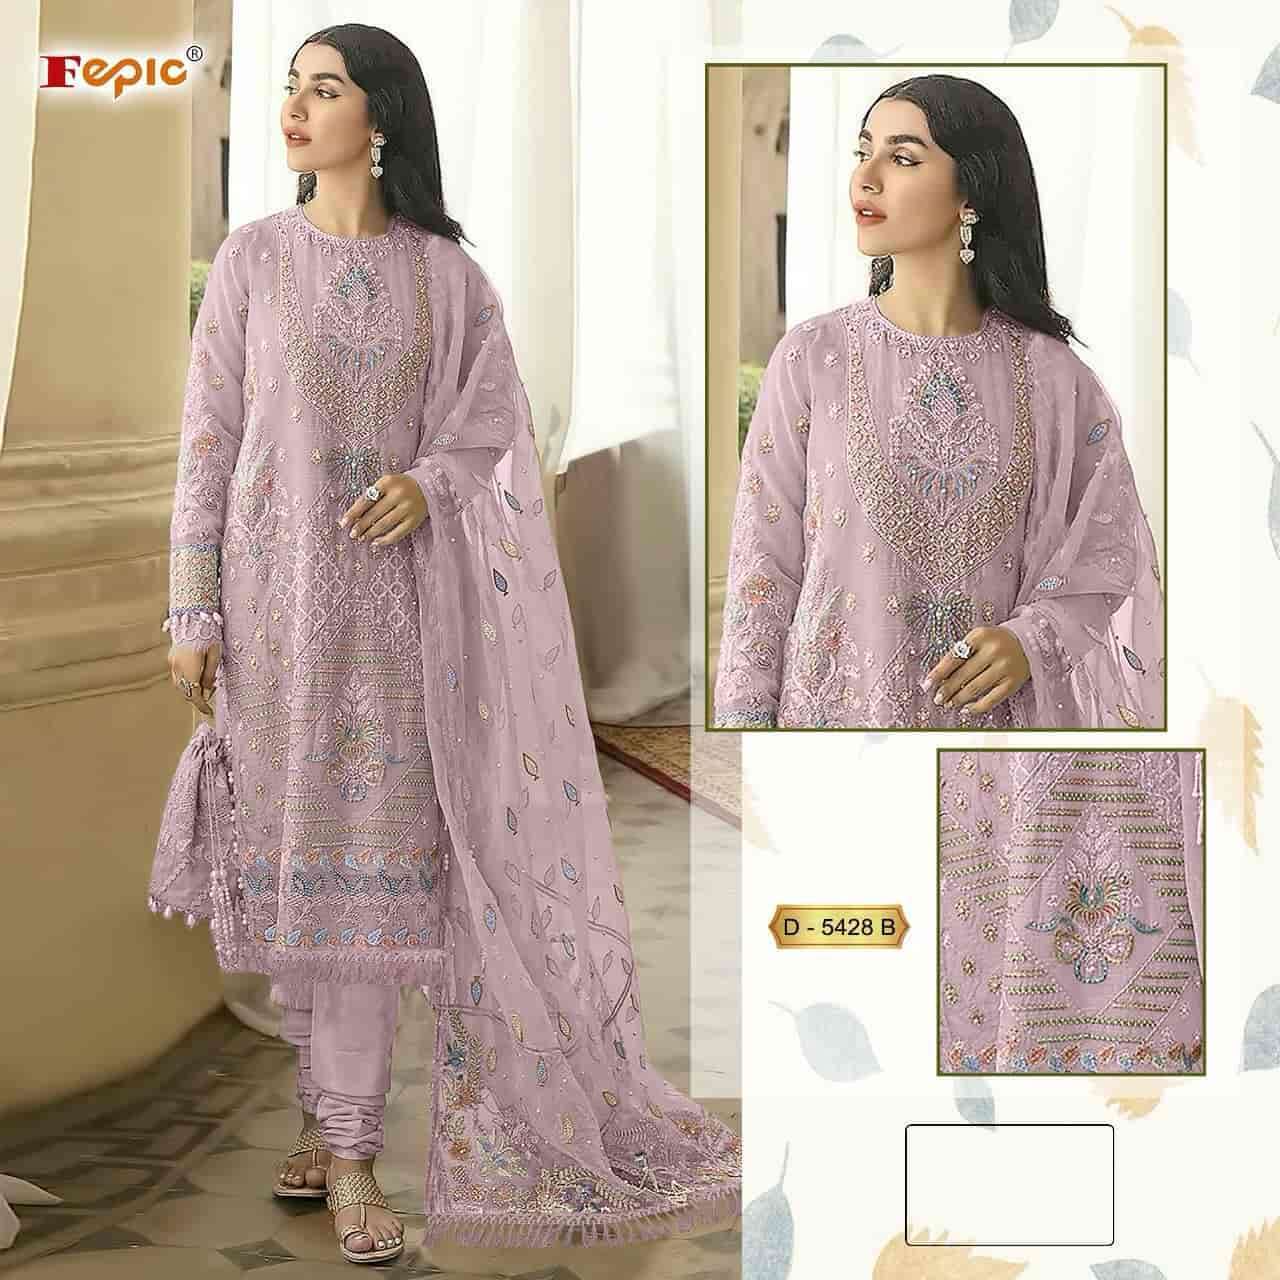 FEPIC D 5428 GEORGETTE WITH EMBROIDERY PAKISTANI SALWAR KAME...